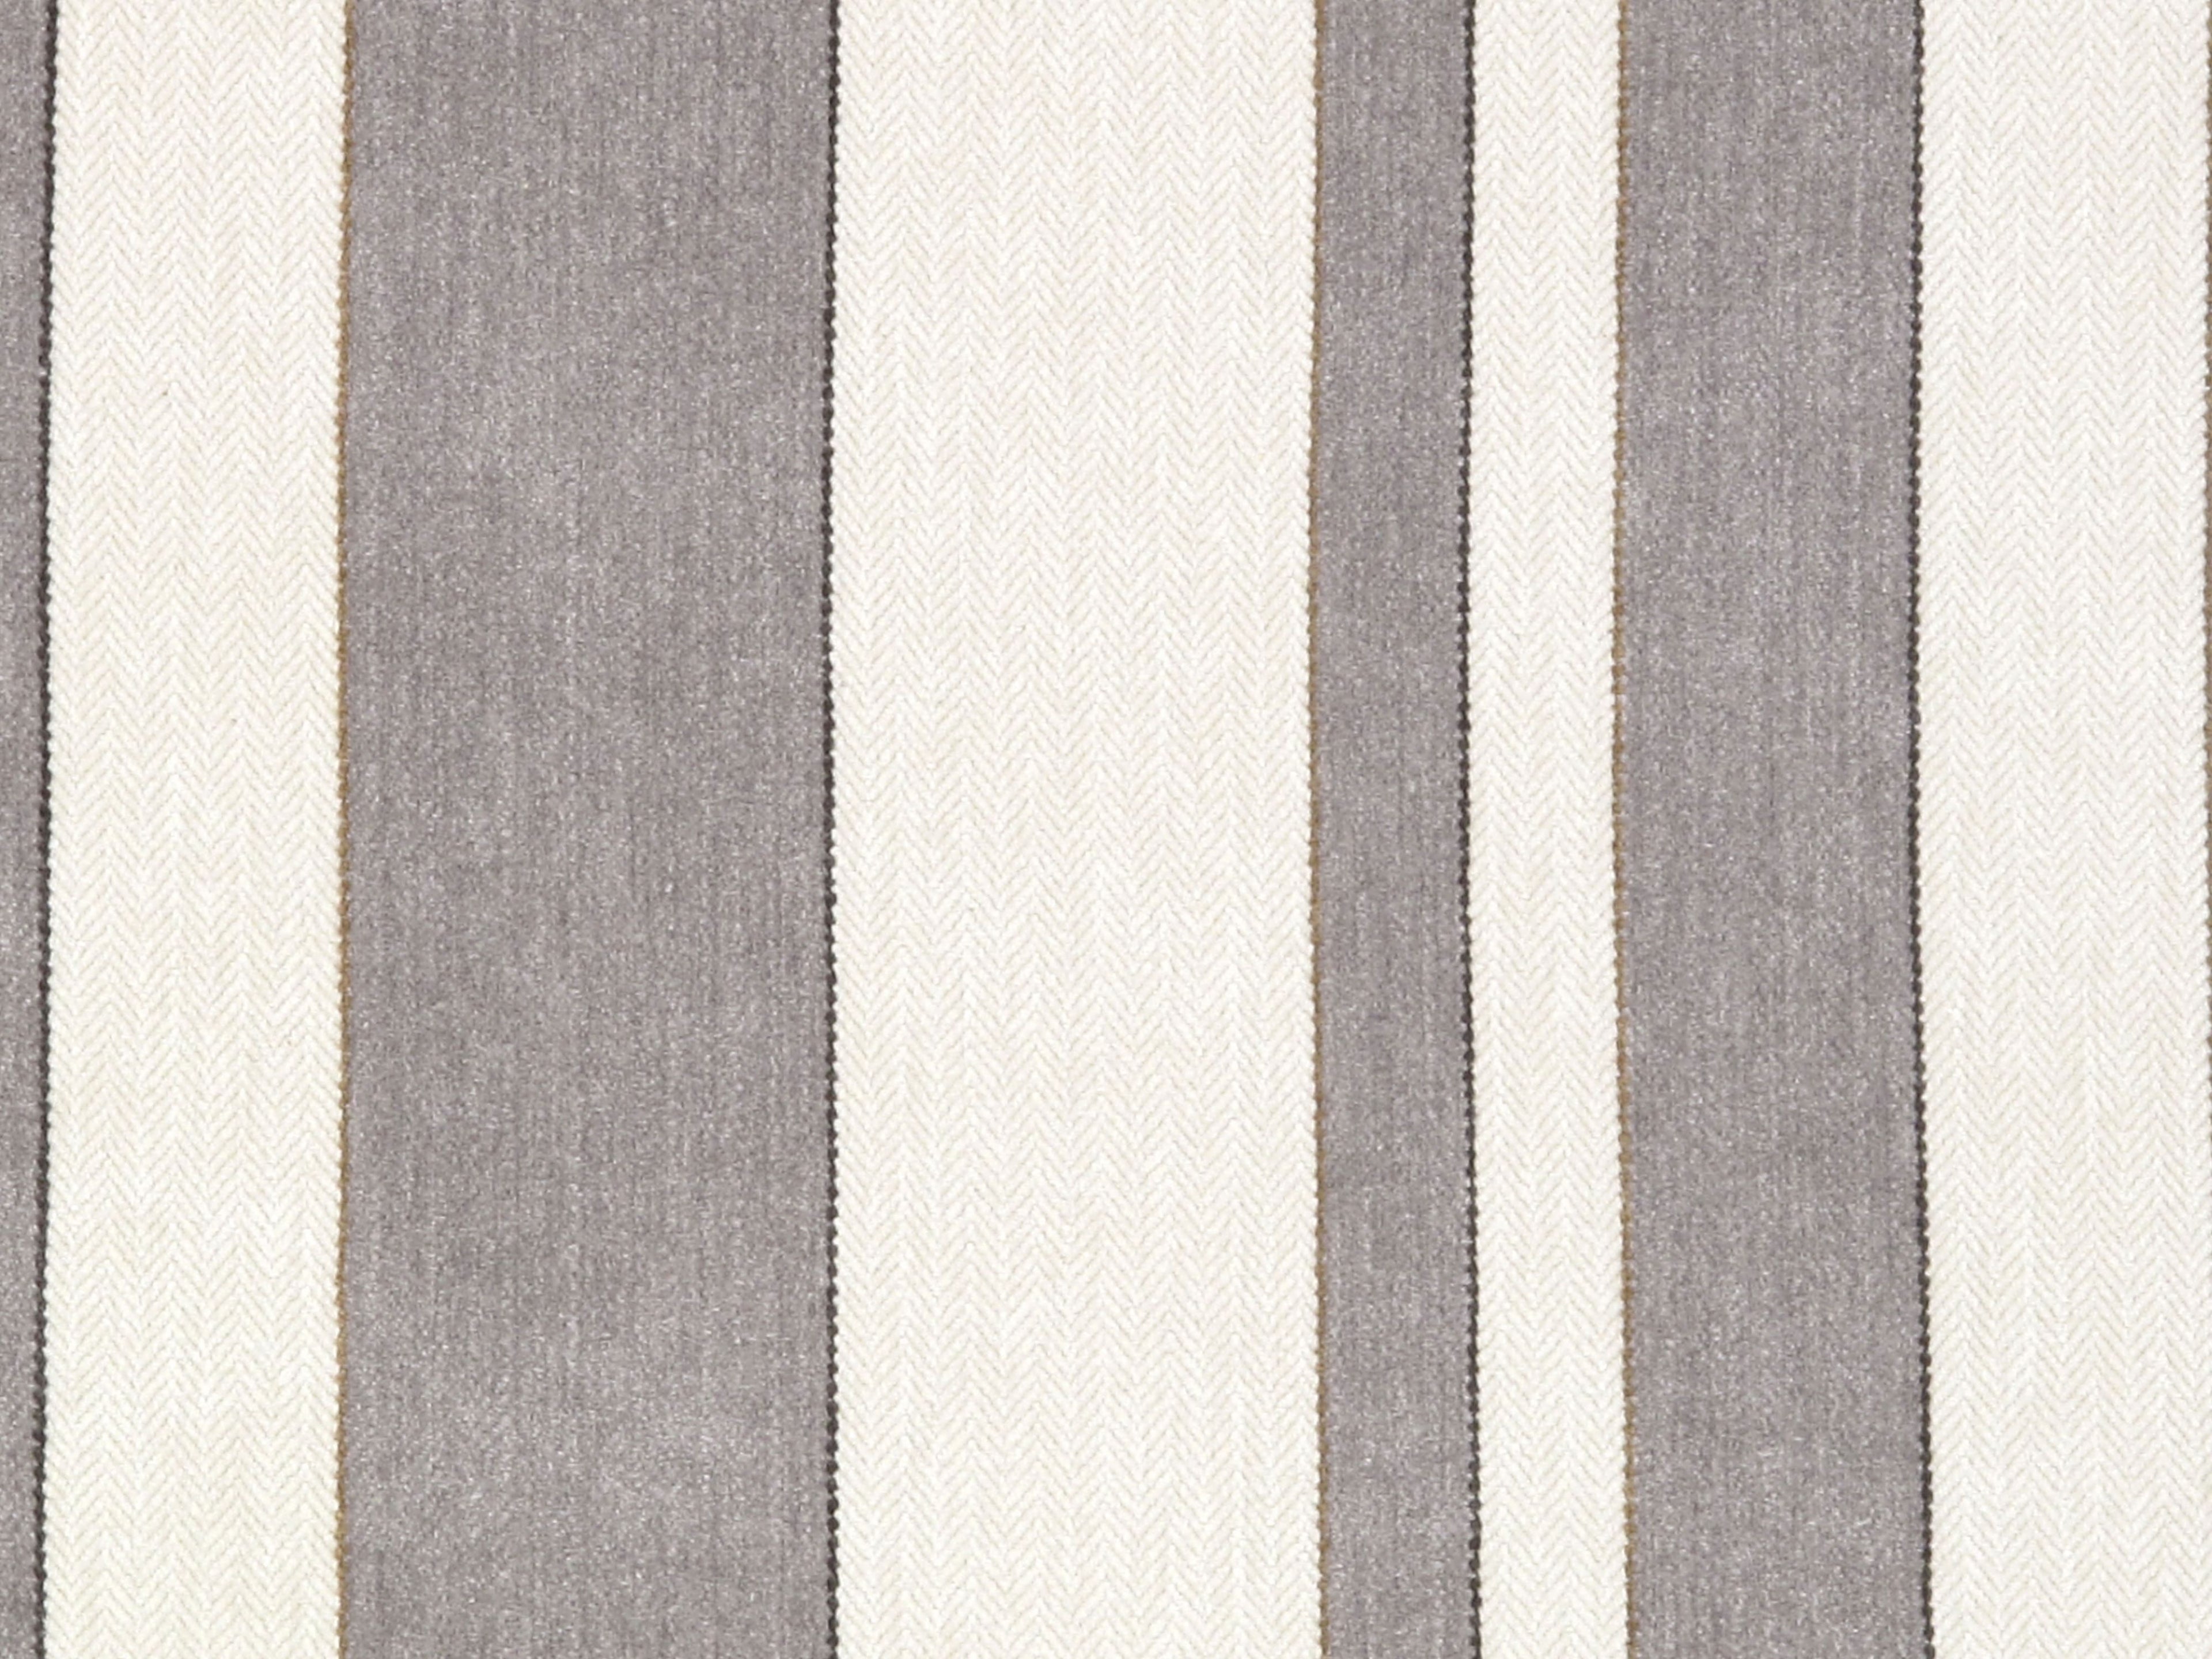 Pedra fabric in arctic/fog color - pattern number LU 00018187 - by Scalamandre in the Old World Weavers collection